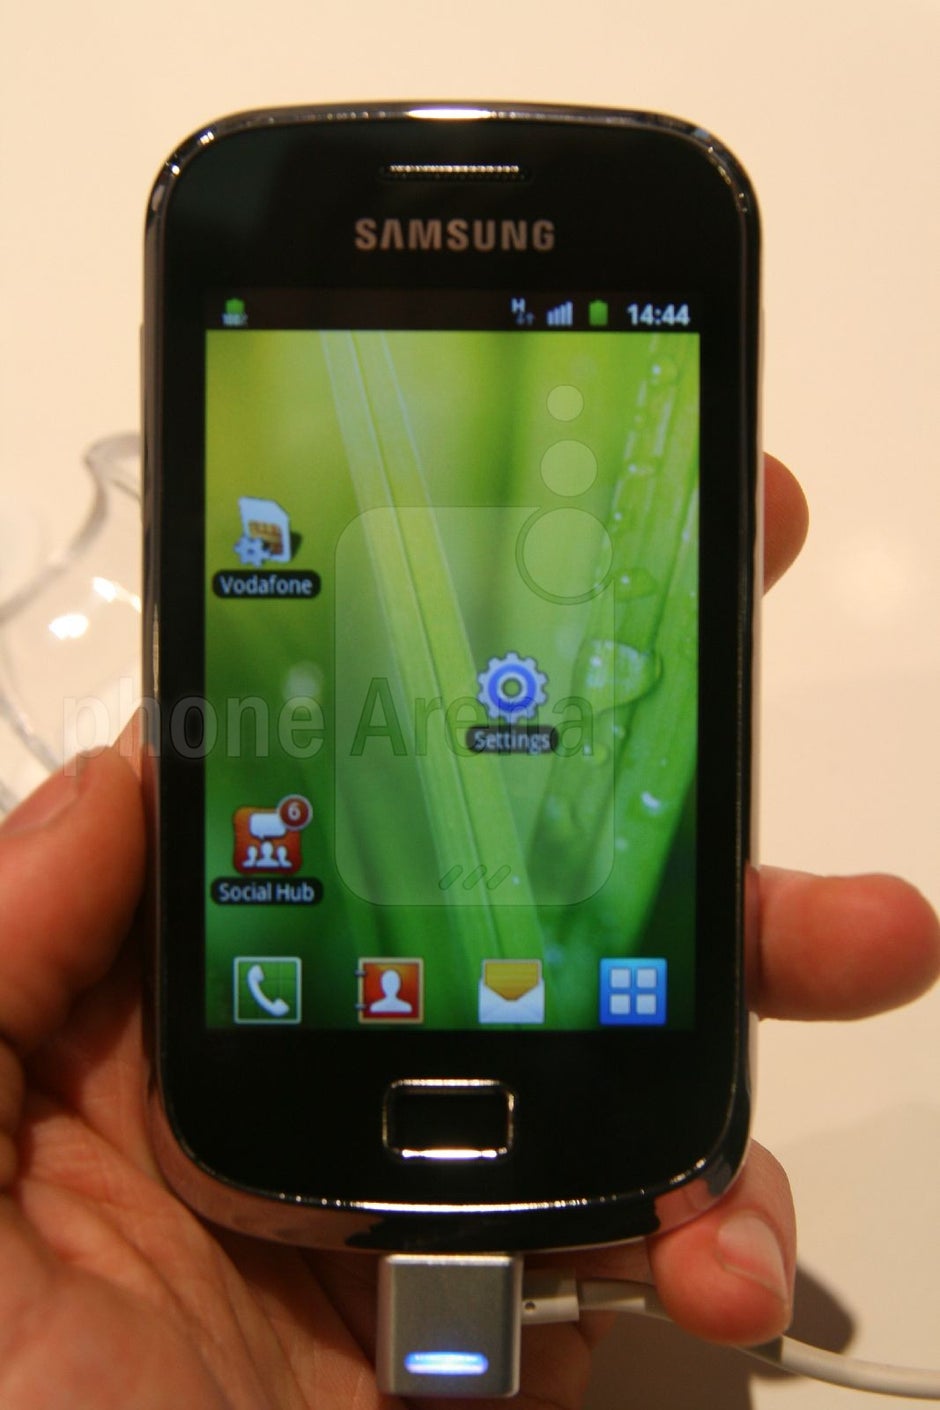 The Samsung Galaxy mini 2 will likely launch with Android 2.3 Gingerbread - Samsung Galaxy Mini 2 Hands-on Review